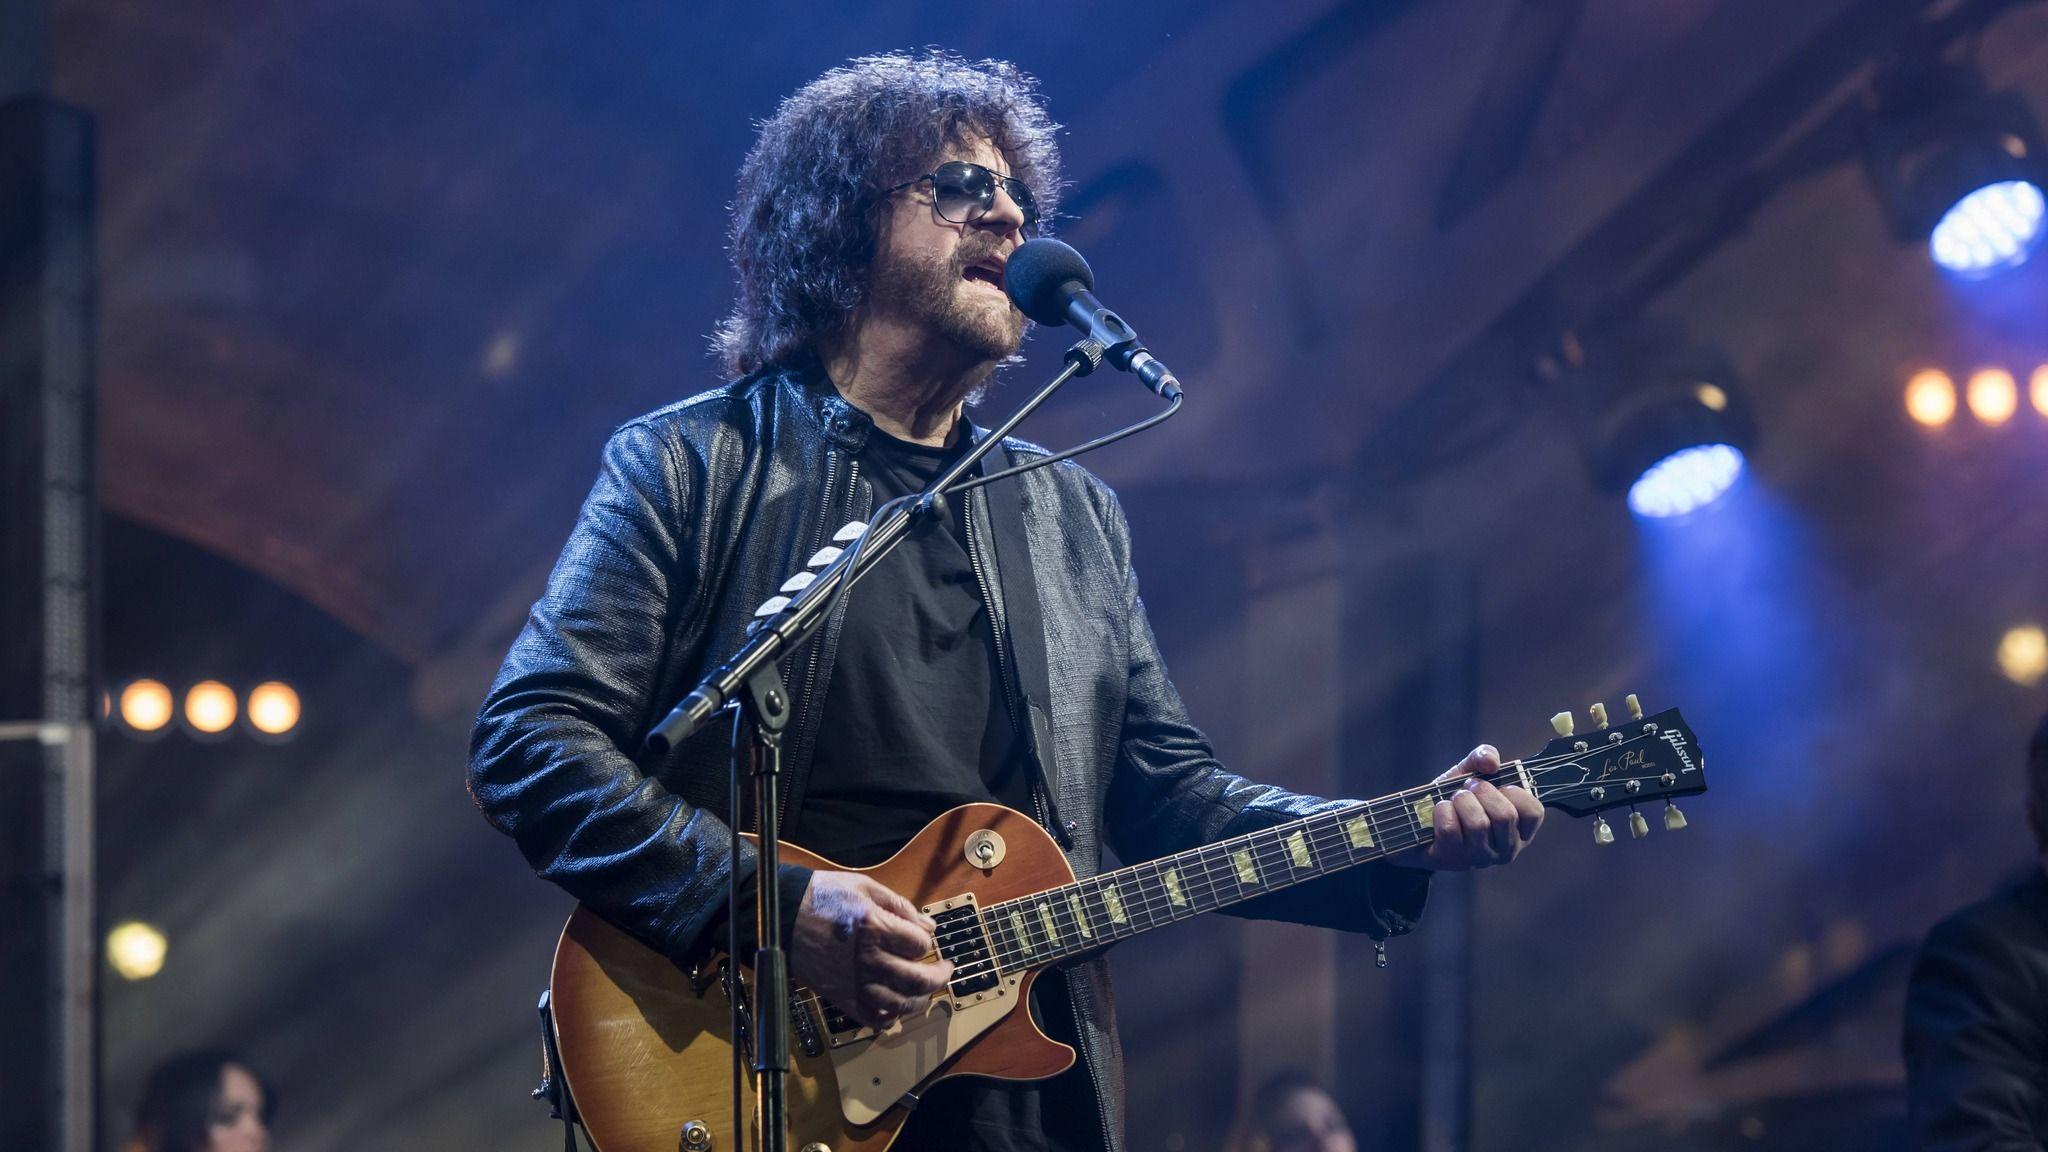 Jeff Lynne's Electric Light Orchestra at LA Forum. Latest CBS Local